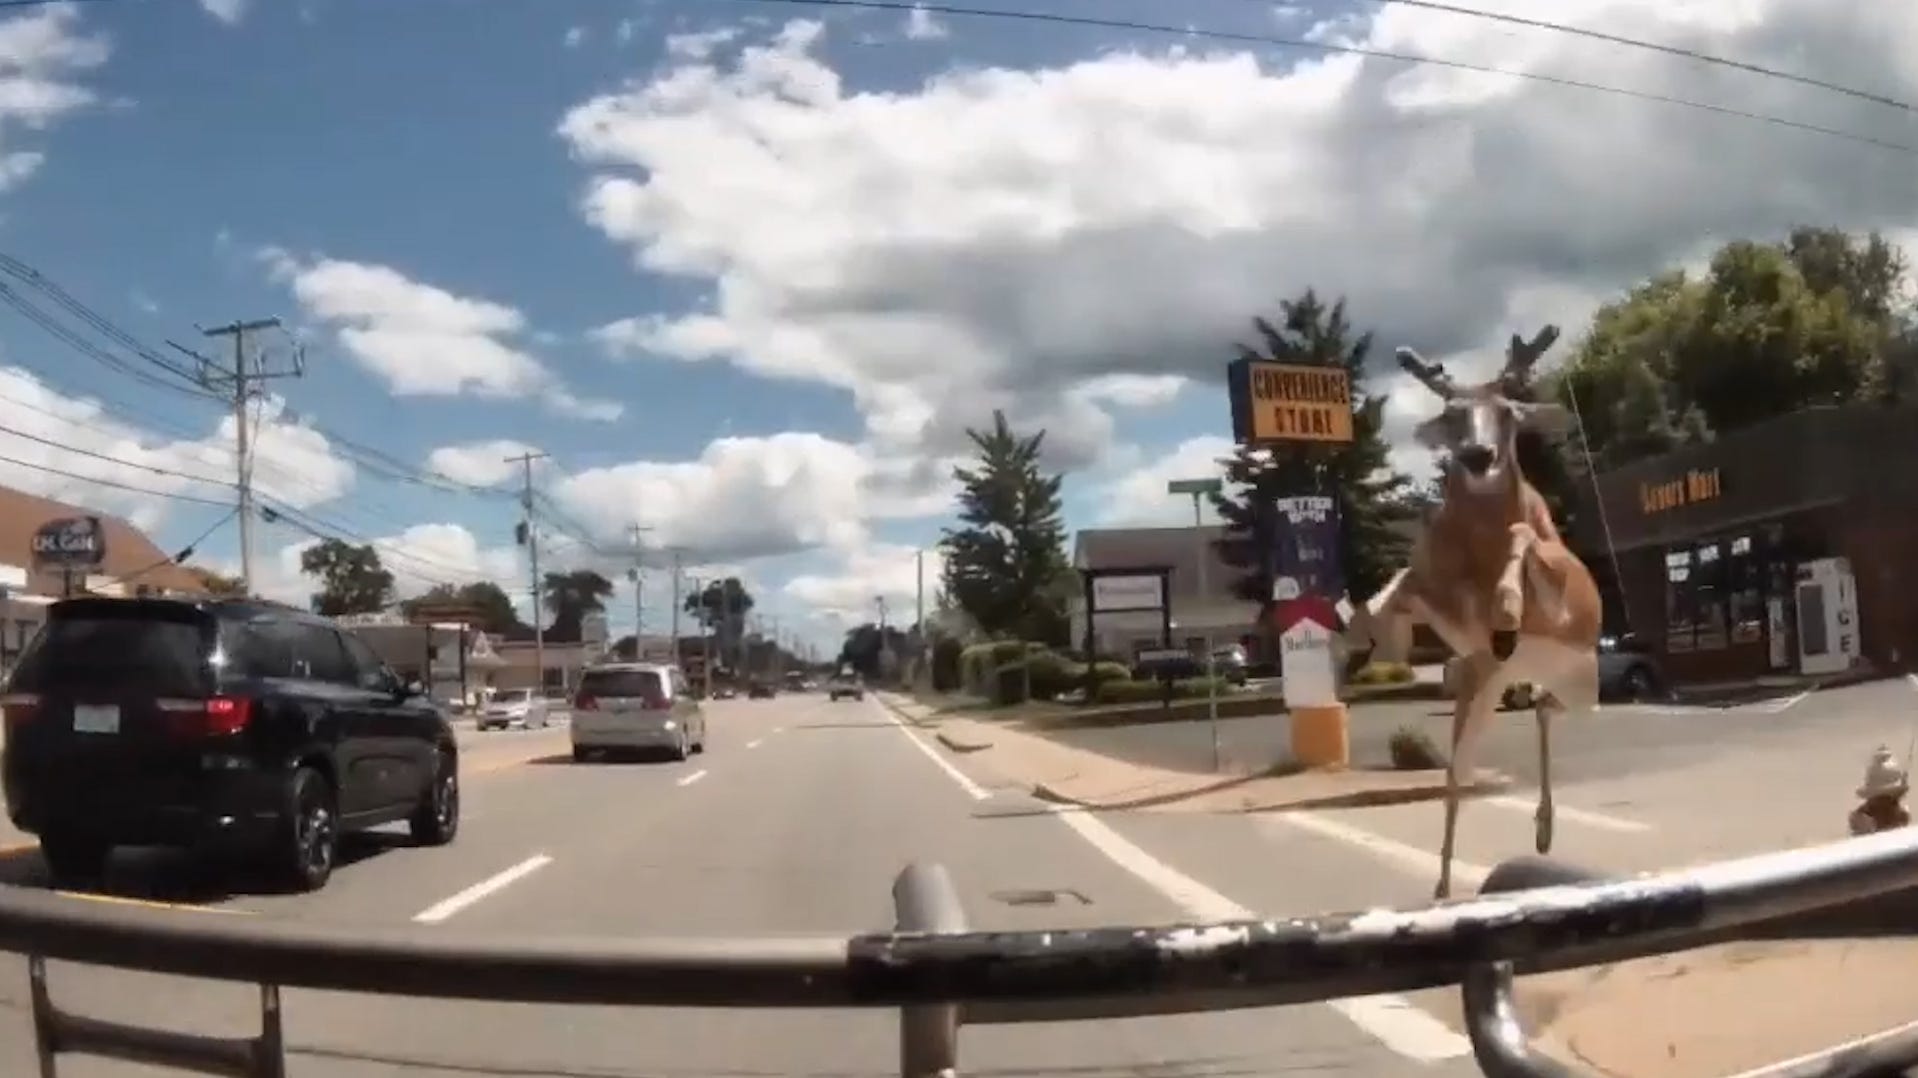  Video shows deer crashing into bus in Rhode Island injuring 3: Watch dramatic scene unfold 